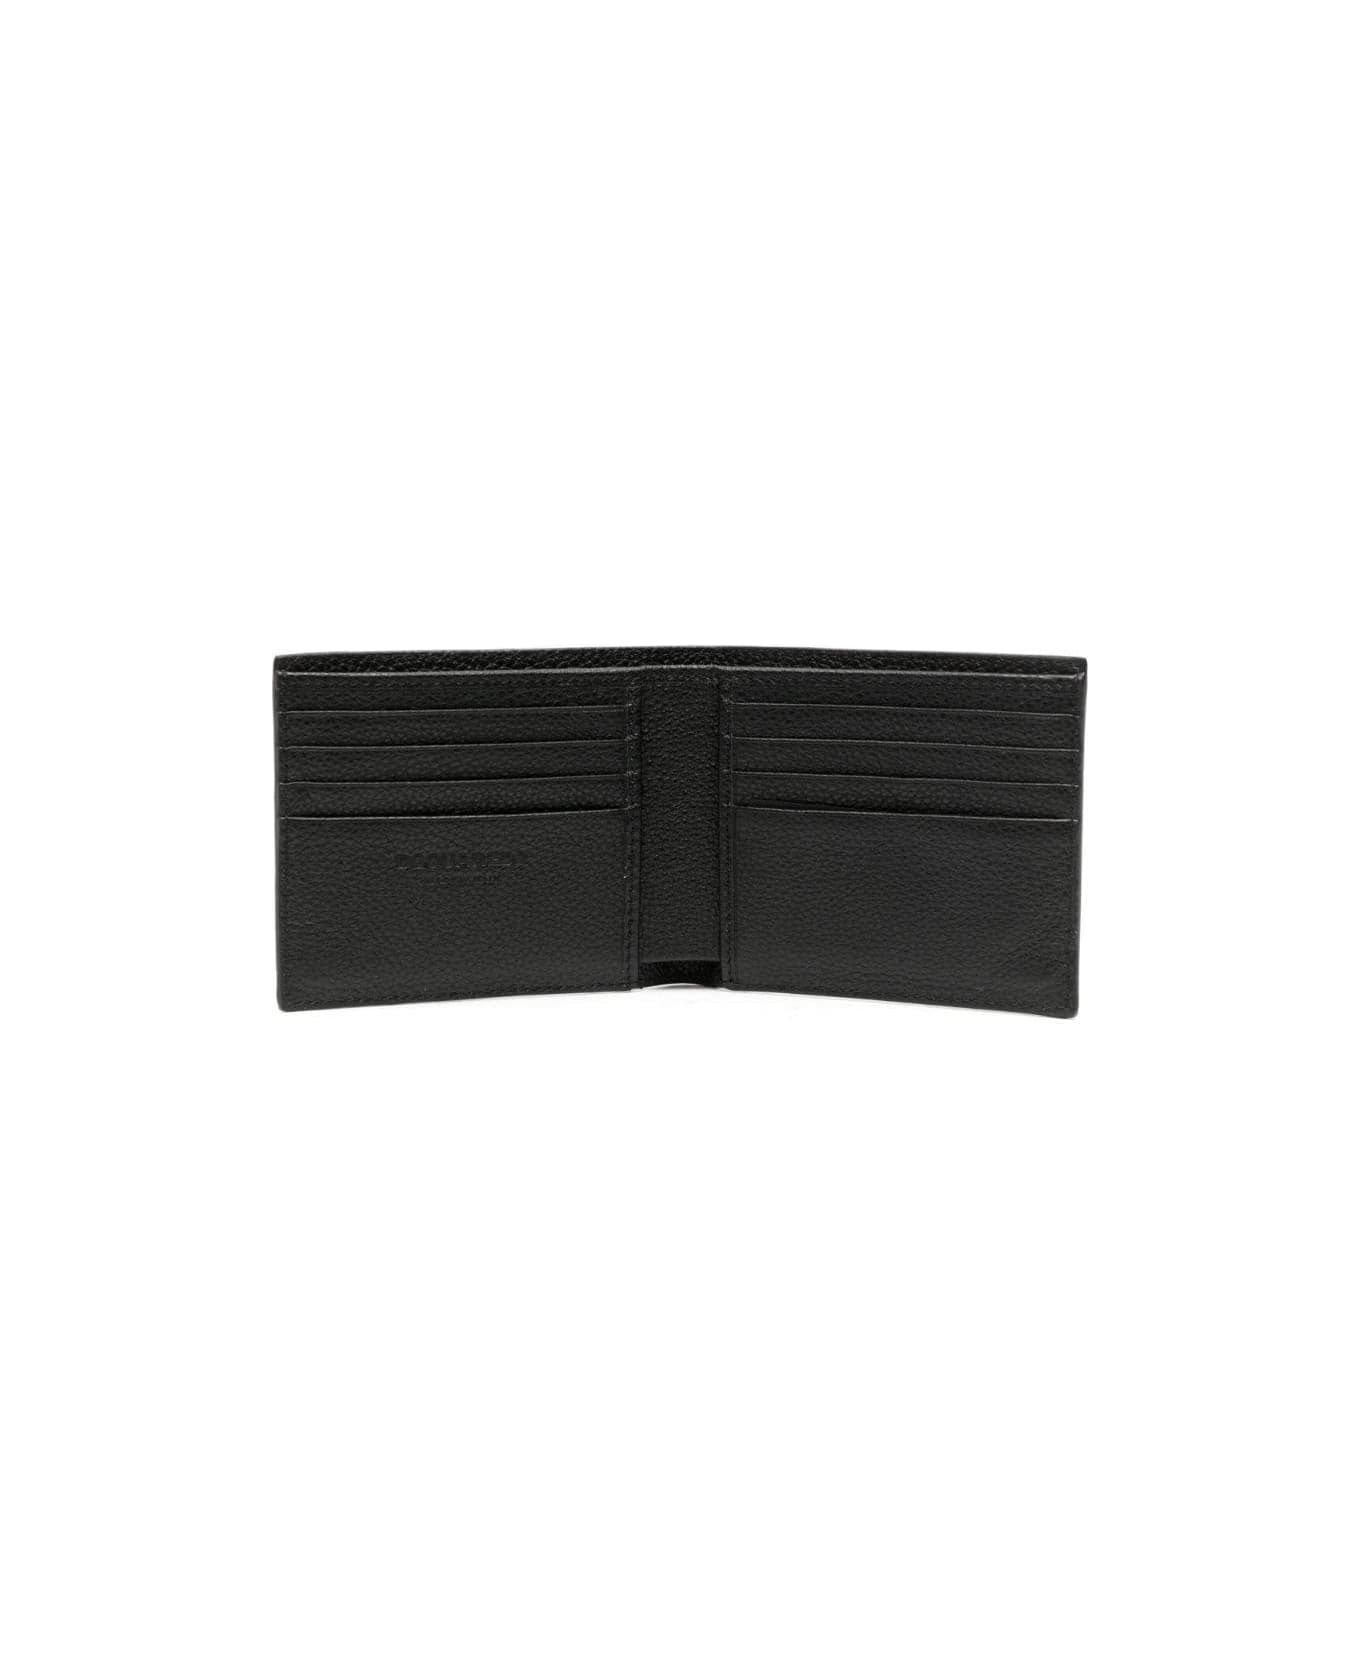 Dsquared2 Leather Wallet